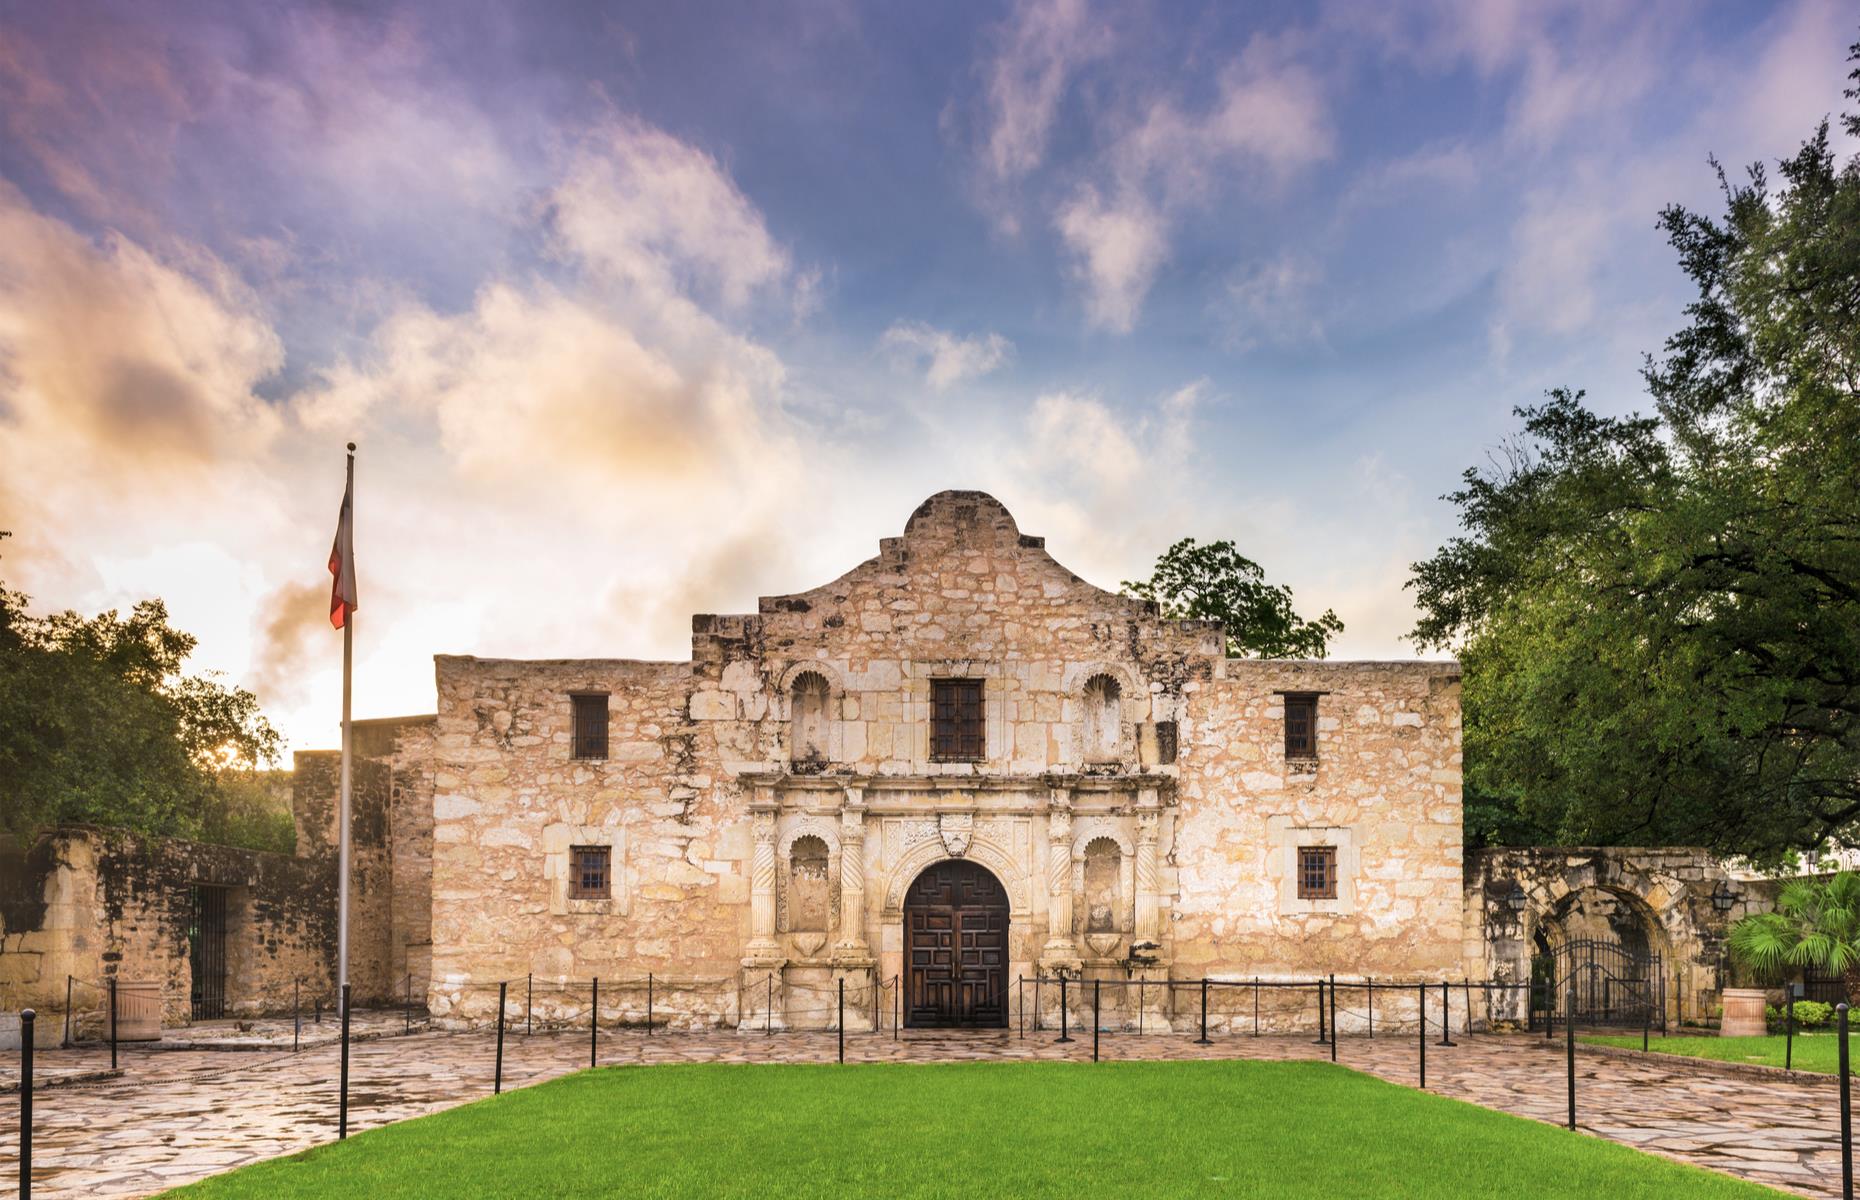 <p>The Alamo mission and fortress was a key site during the Texas revolution. It was the location of the fabled Battle of the Alamo in 1836, which saw Texans battle Mexicans in their fight for independence. The Alamo church, or 'the shrine' as it's commonly known, is the striking heart of the complex, with the names of soldiers who defended the mission inscribed inside. The <a href="https://www.facebook.com/OfficialAlamo/">Official Alamo Facebook page</a> is the best place to find updates on opening times. </p>